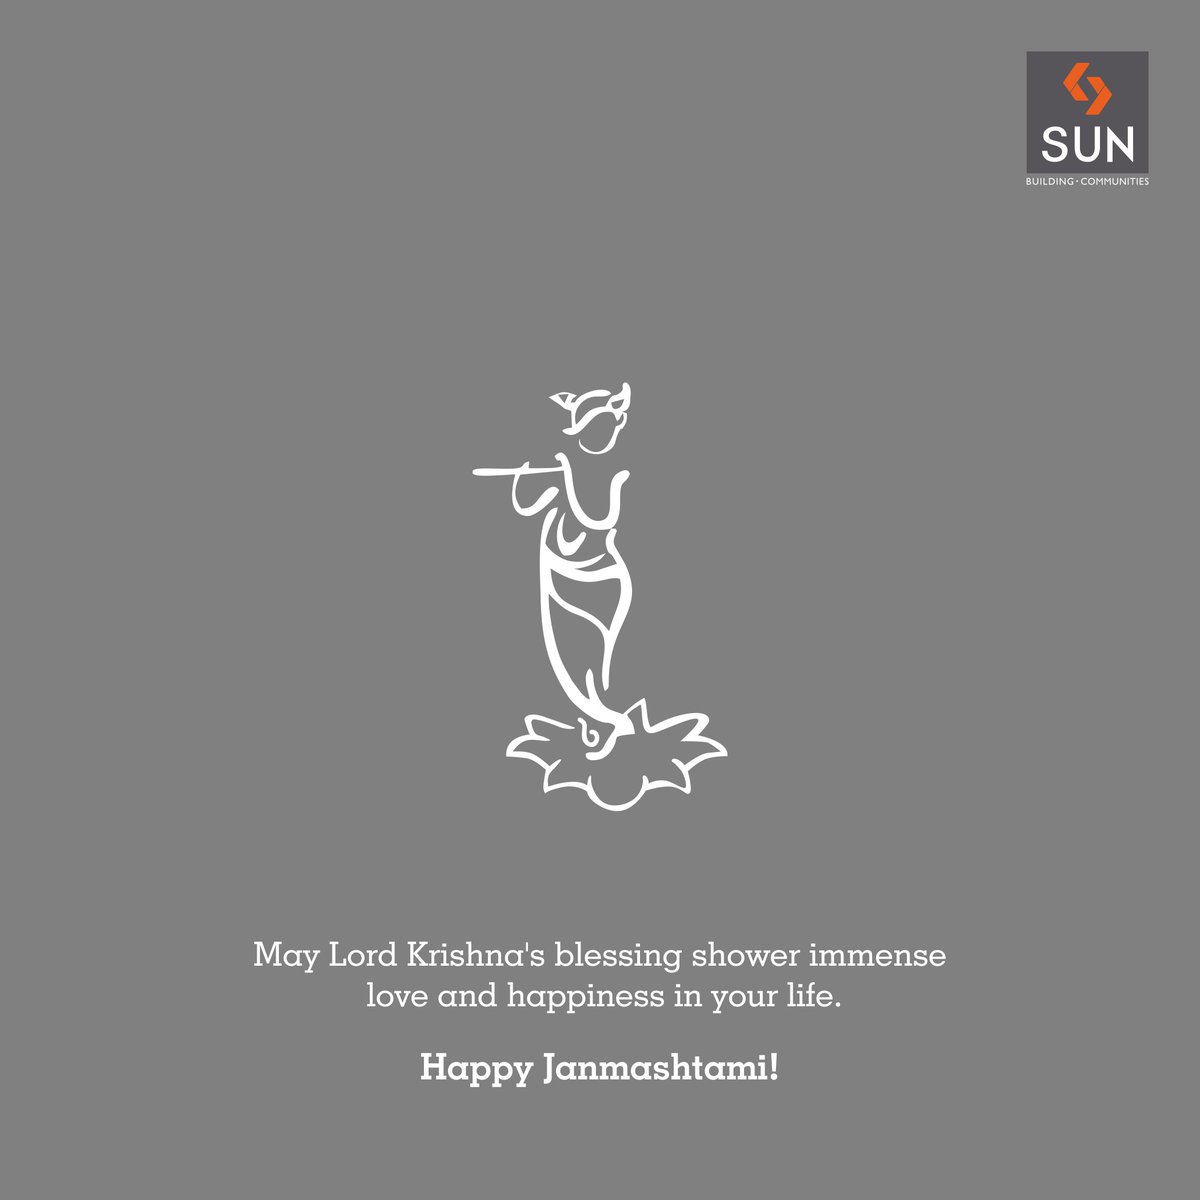 On this auspicious day, we wish that your home gets filled with tons of #prosperity & success.
Happy #Janmashtami! https://t.co/tgRtUJZ3UL